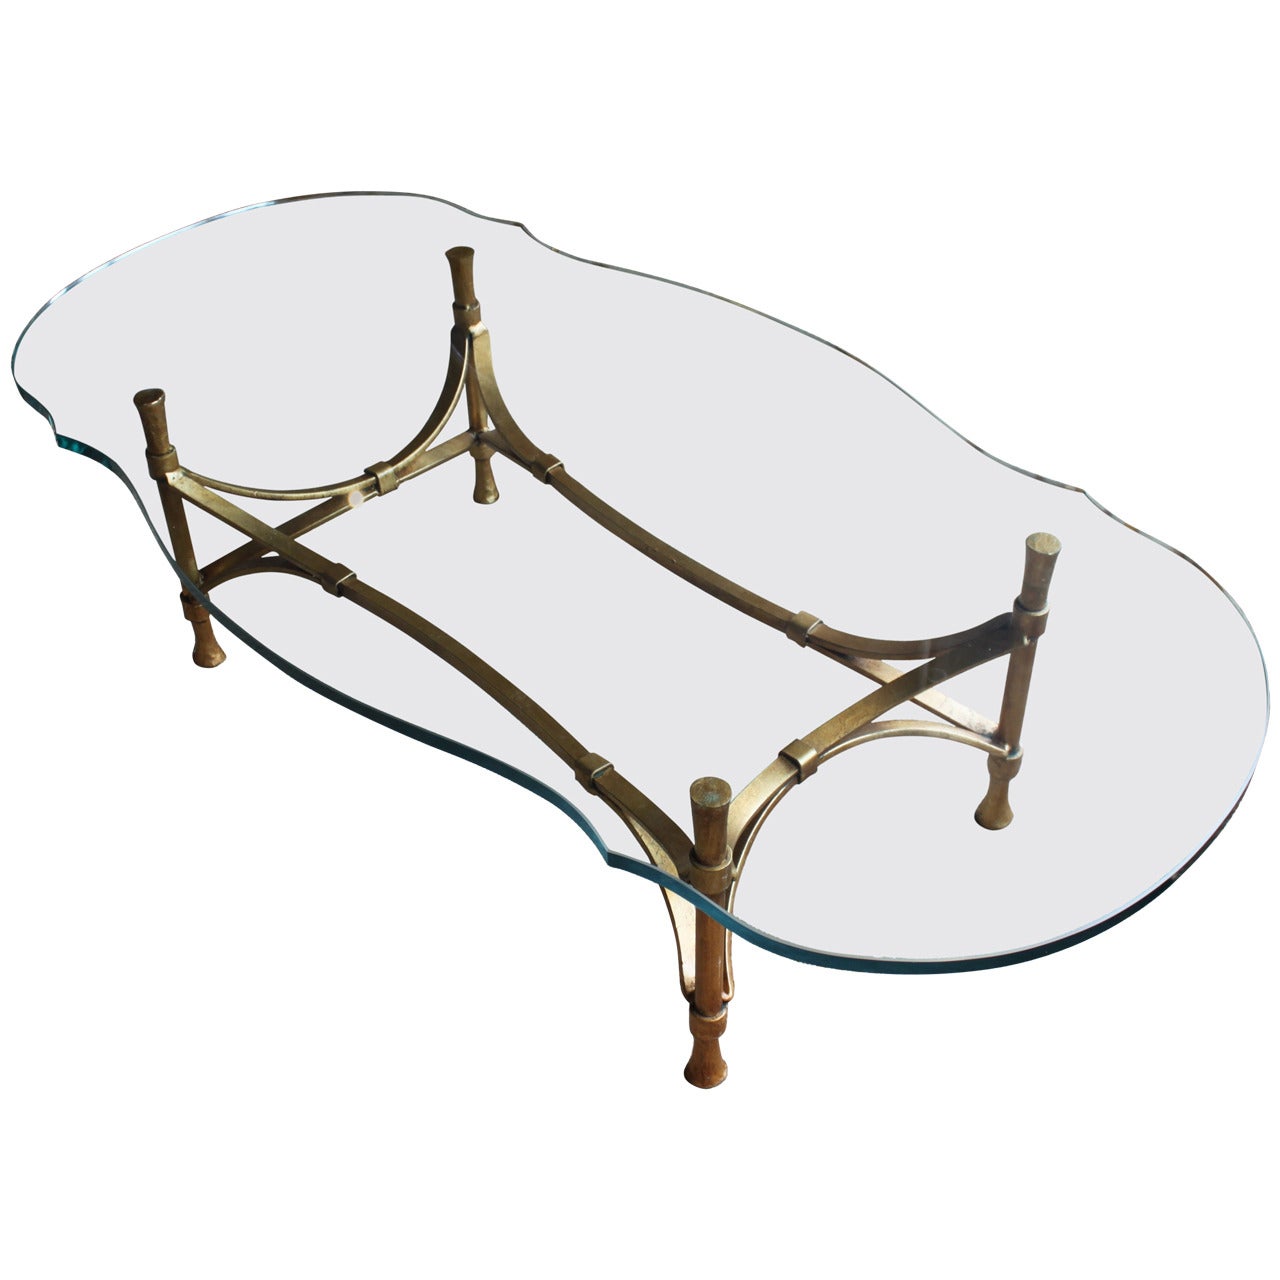 Decorator Gilt Wrought Iron Coffee Table with Cut and Rounded Glass